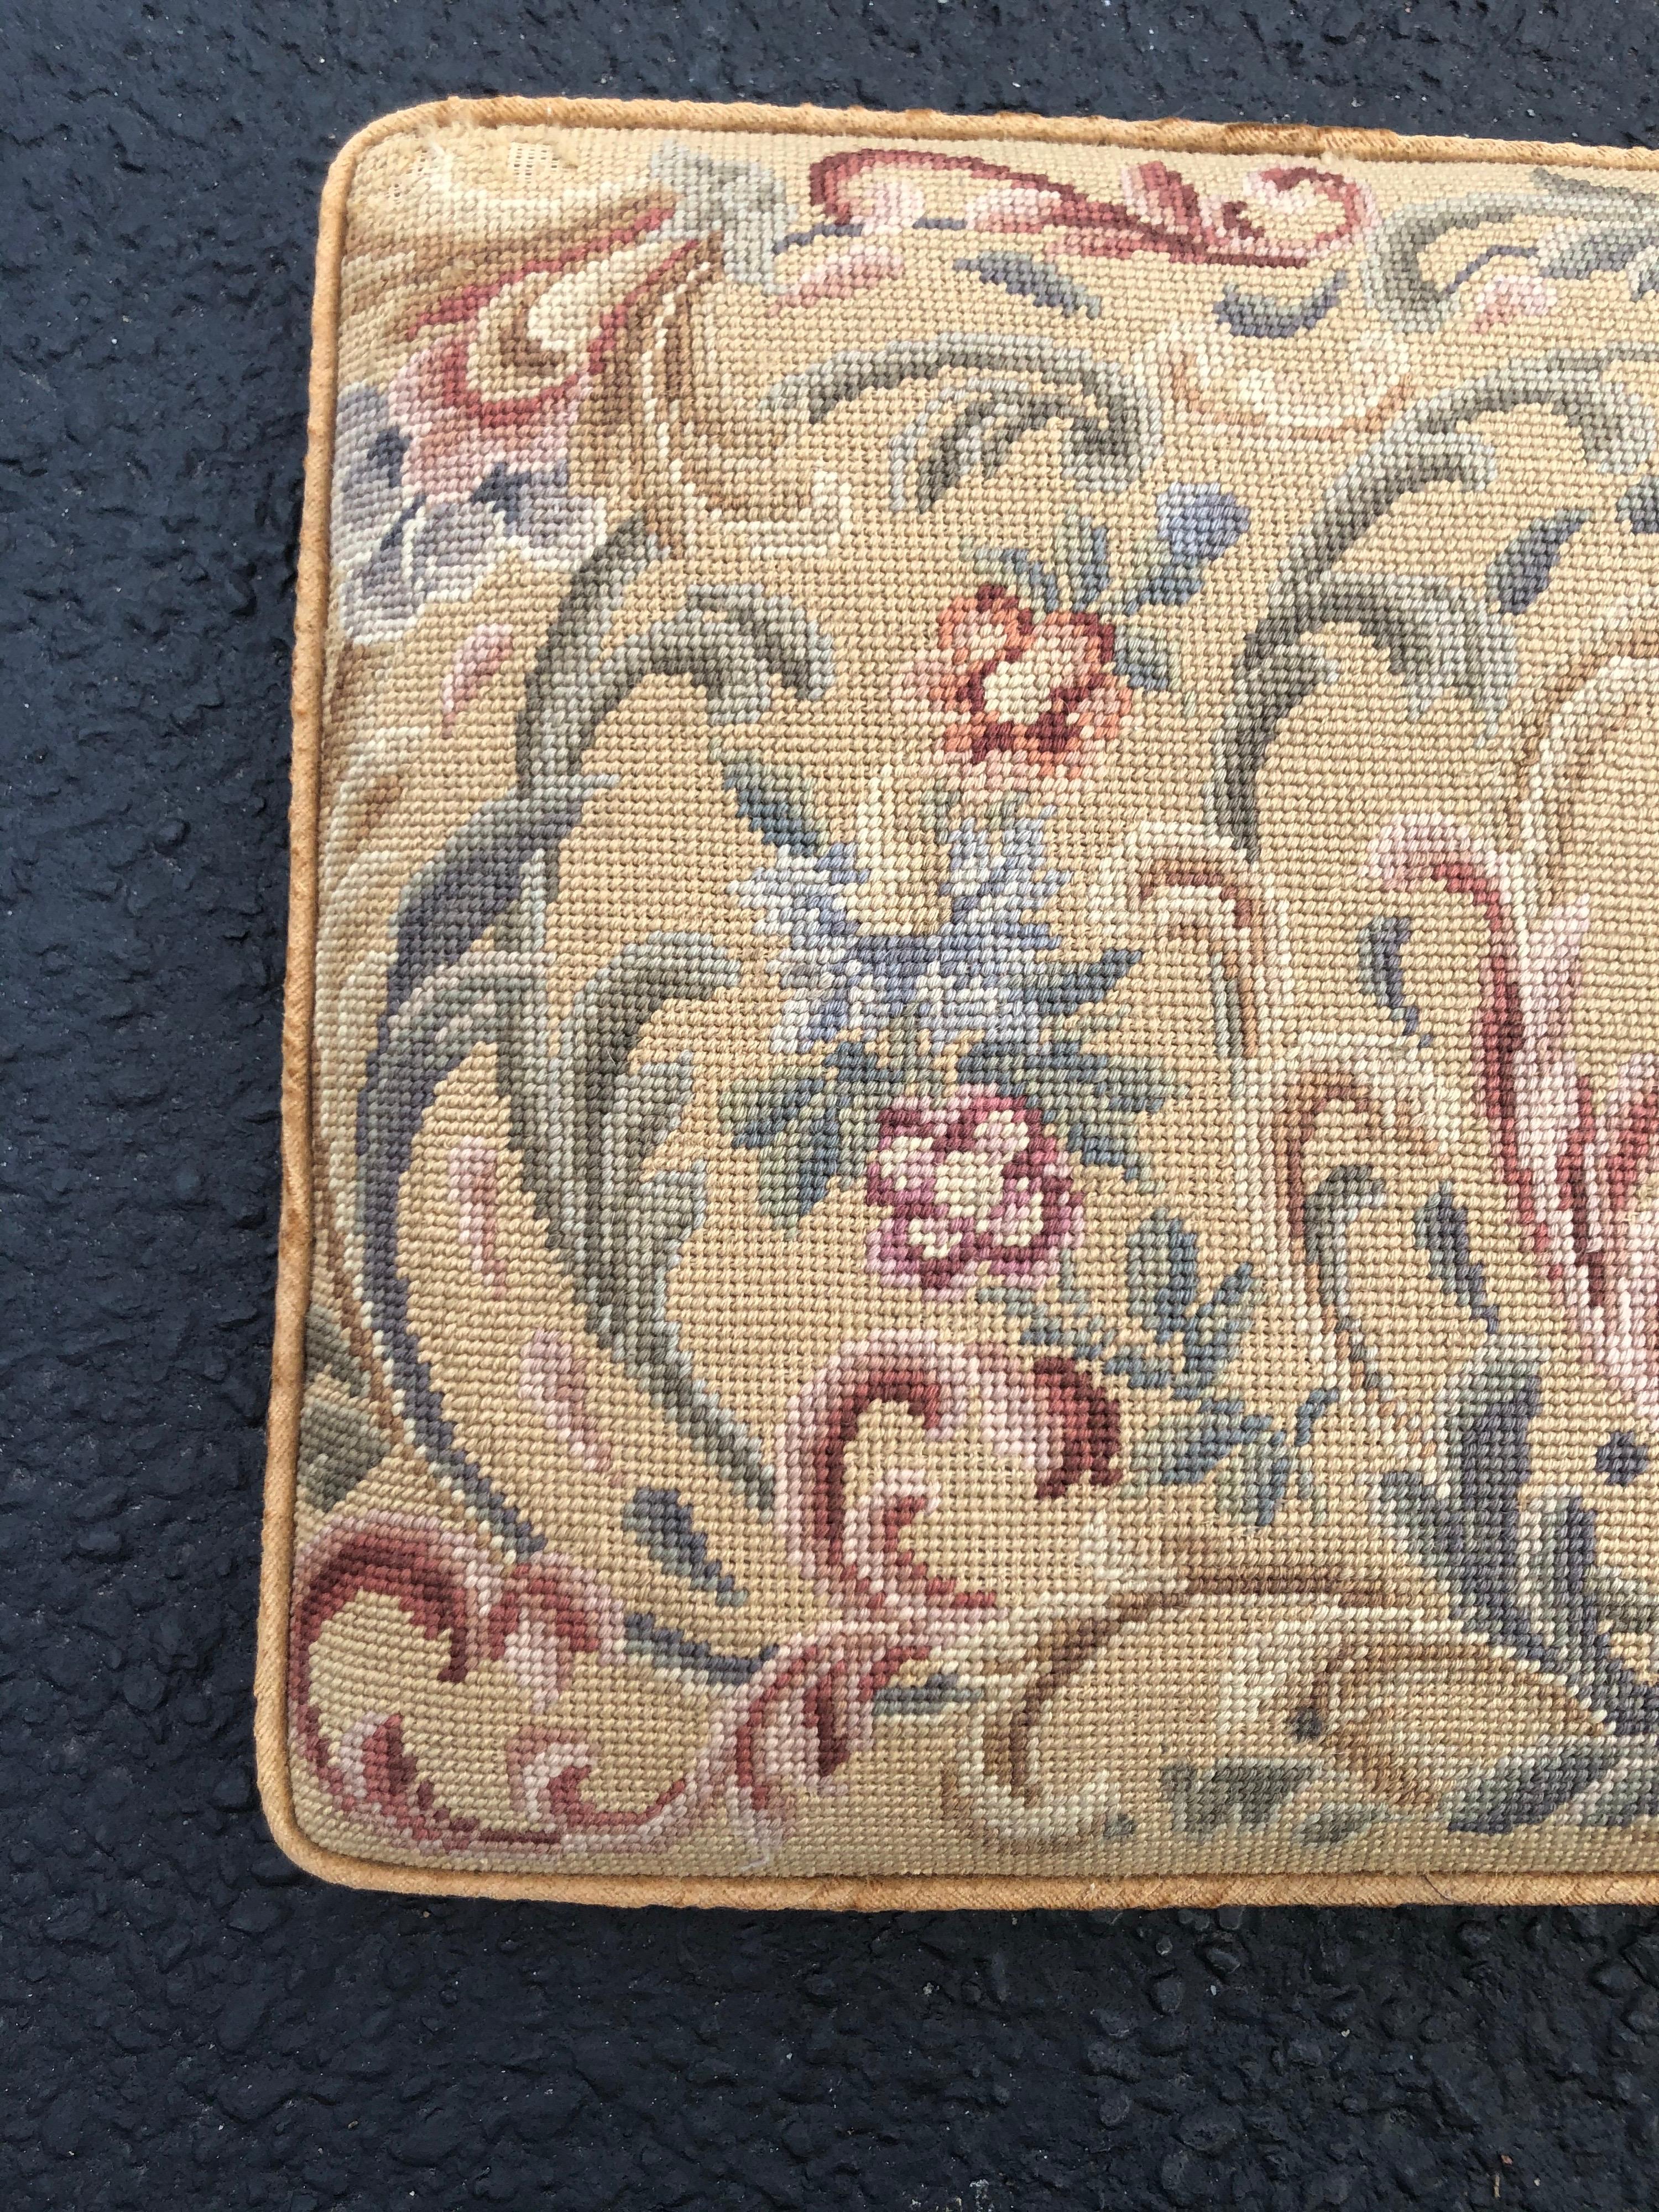 Vintage Needlepoint Upholstery Wall Hanging  5